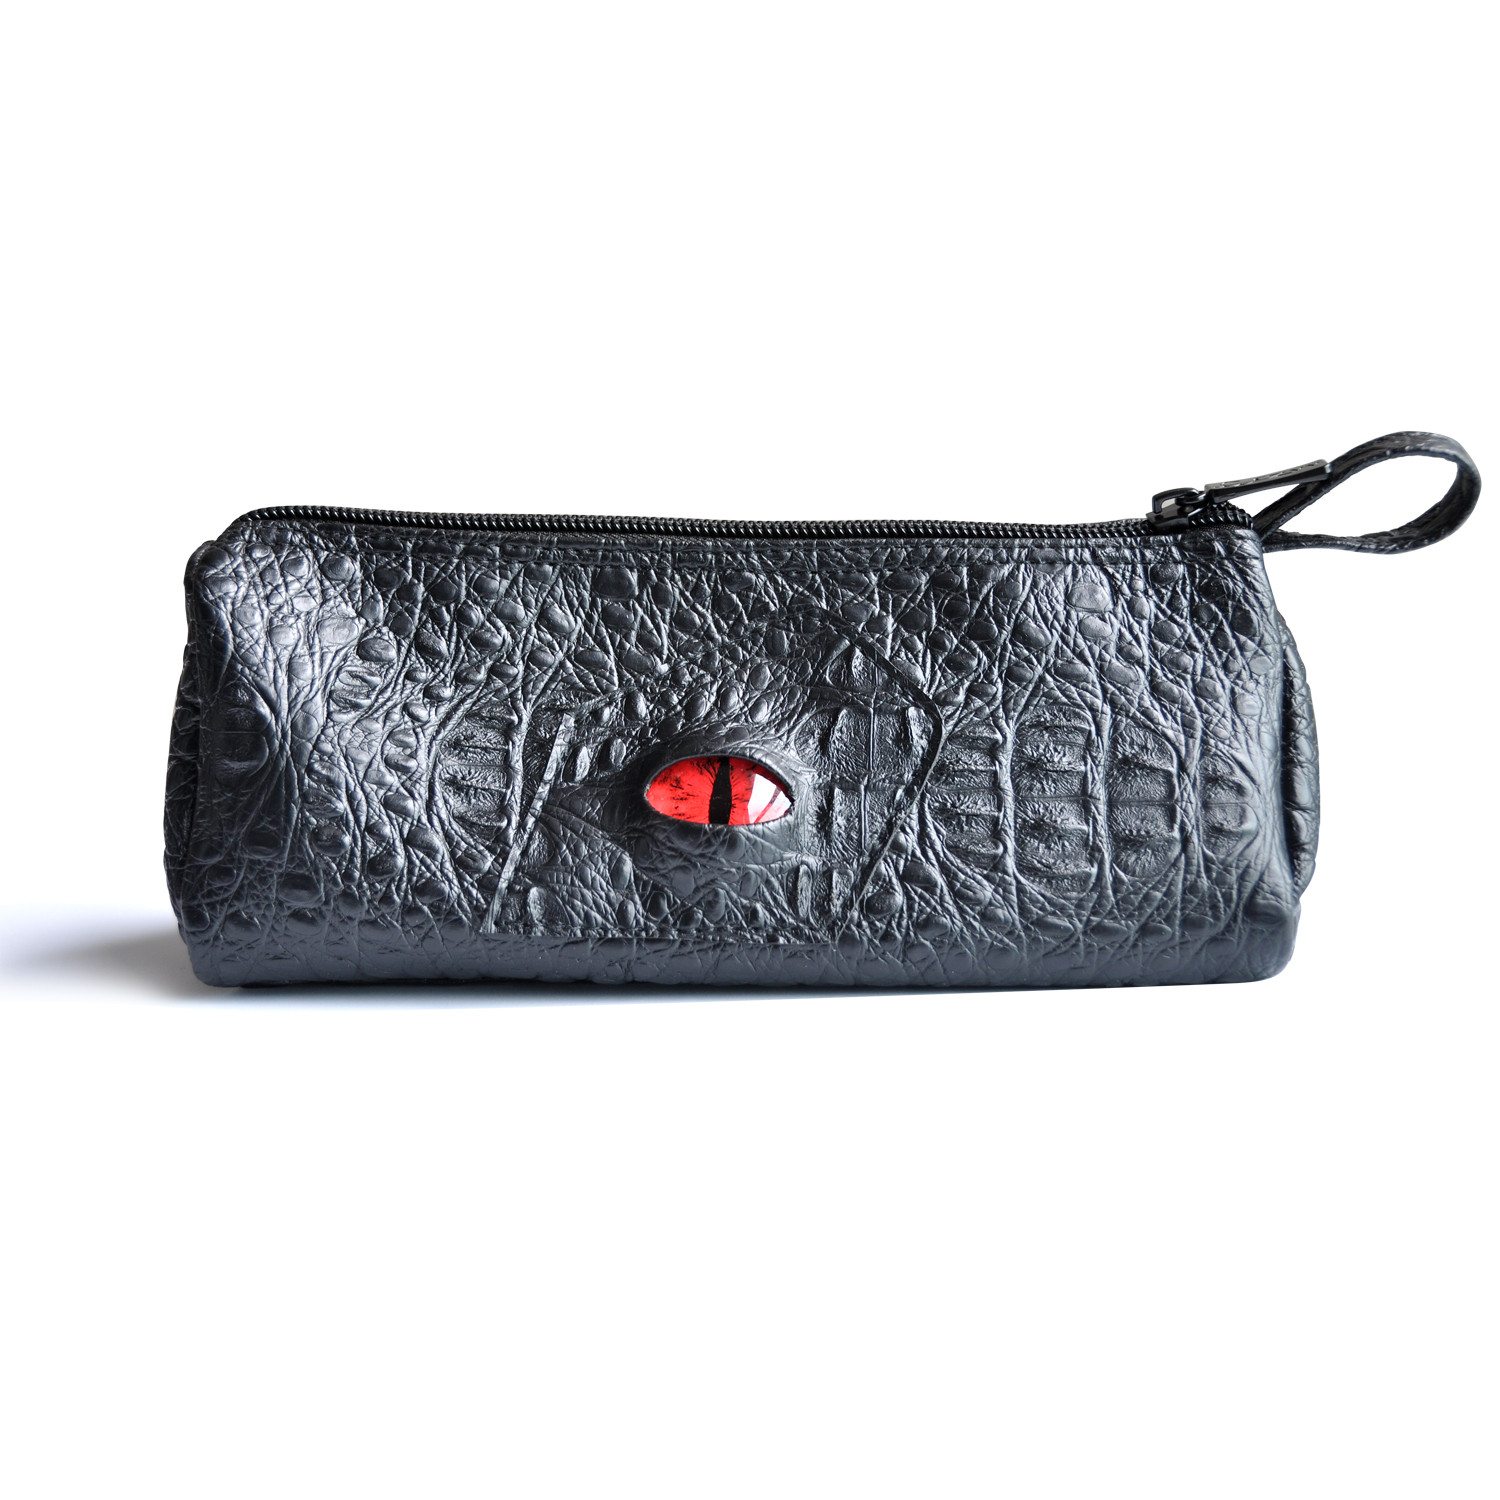 CZYY Pencil Case Black Faux Leather with 3D Dragon Eye and Name Tag ...